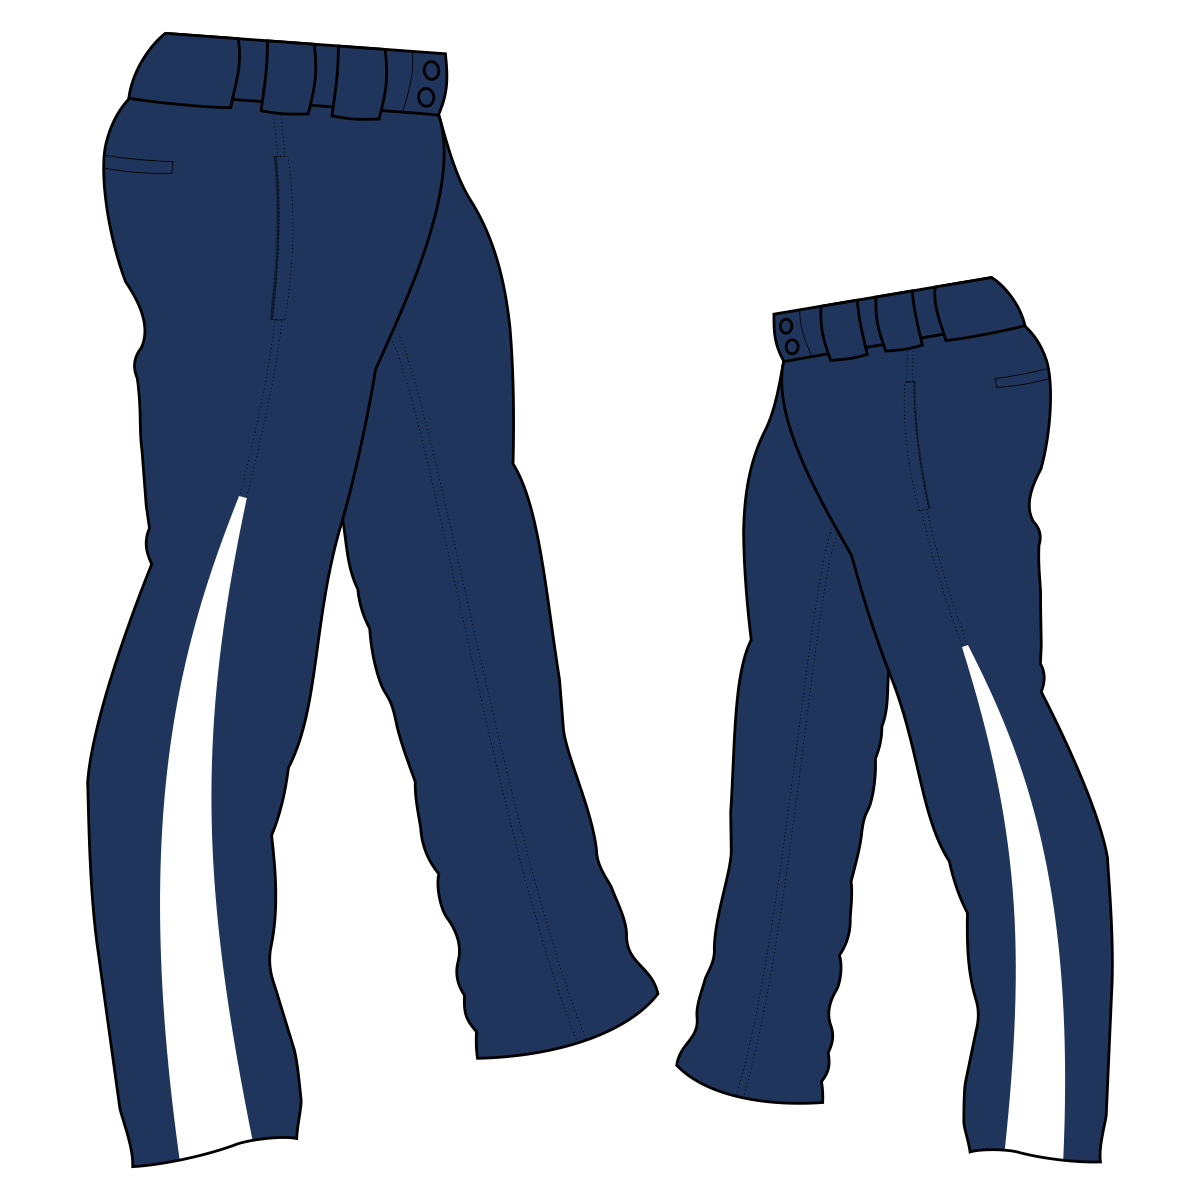 PA-1010 Navy Softball Pants with Front Pockets & Panels